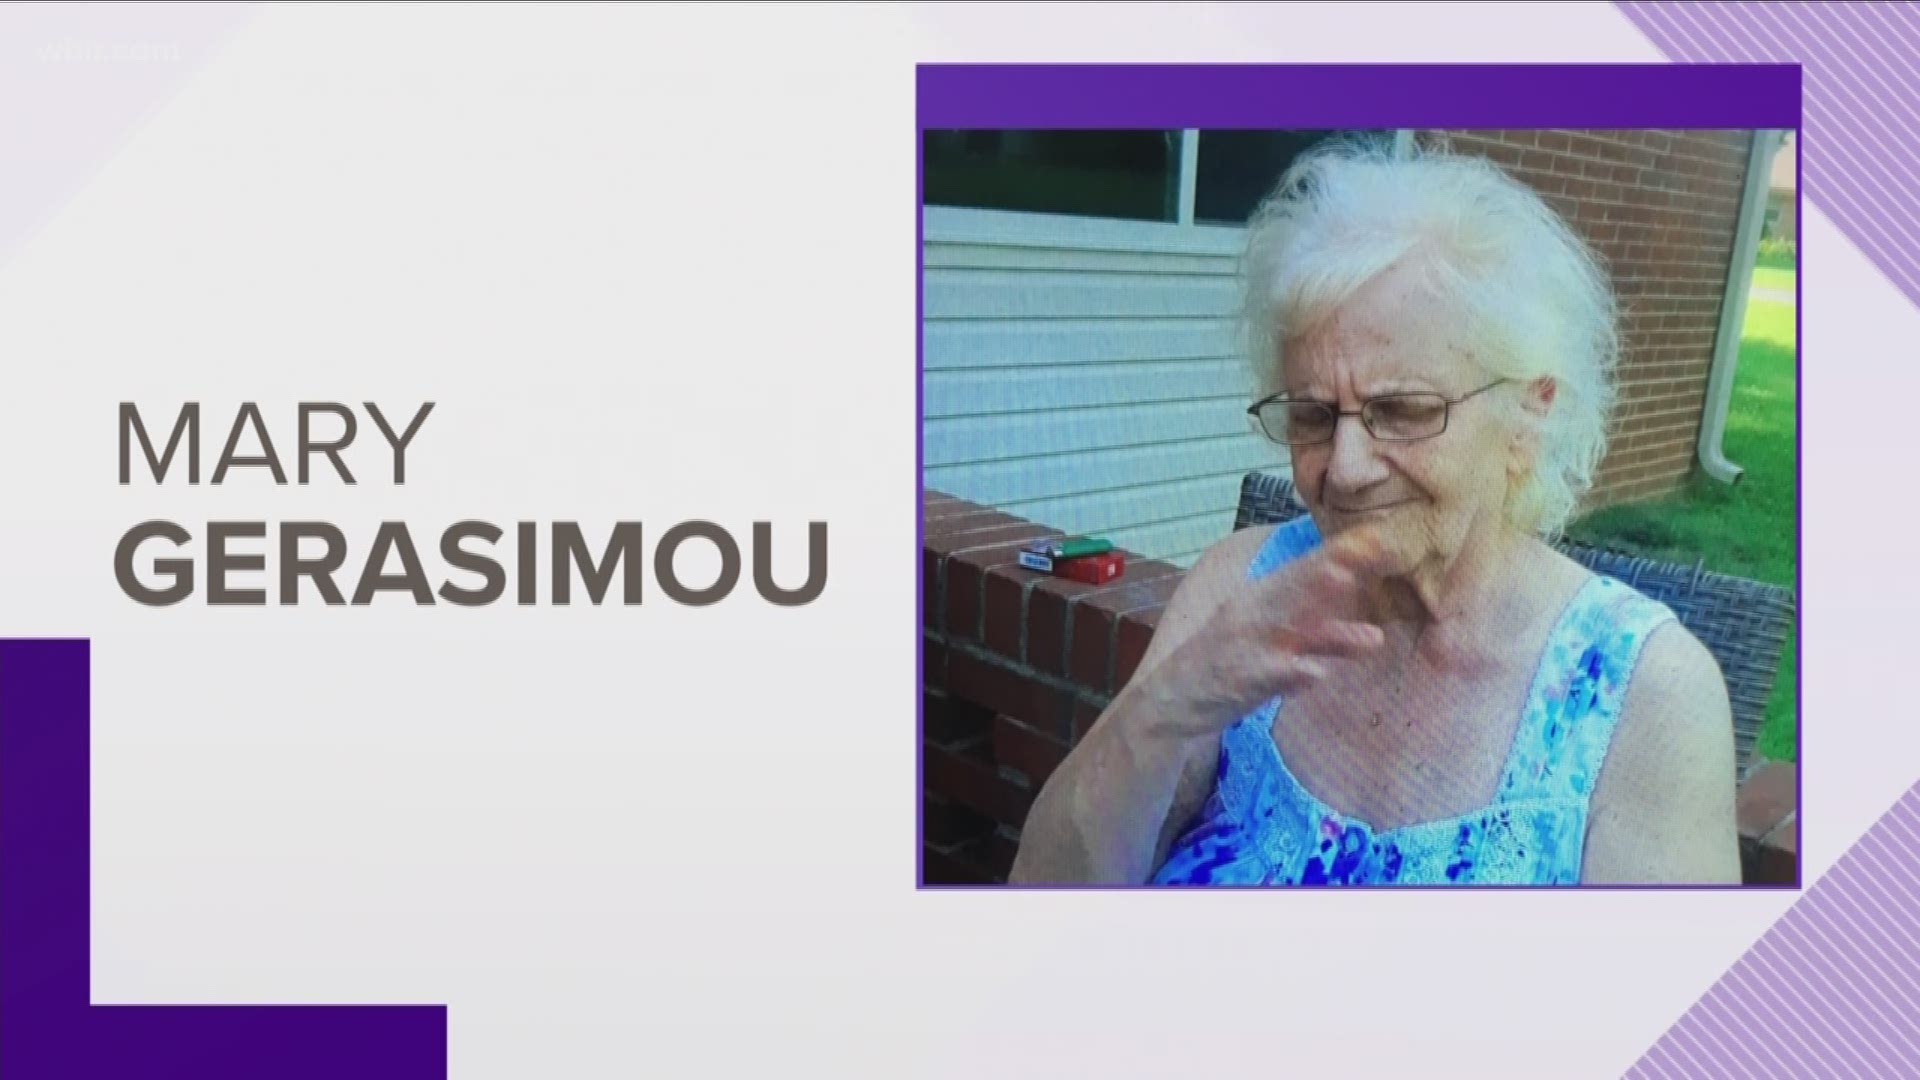 Morristown Police cancelled a silver alert that was issued Friday night after Mary Gerasimou was found safe in a friend's apartment.